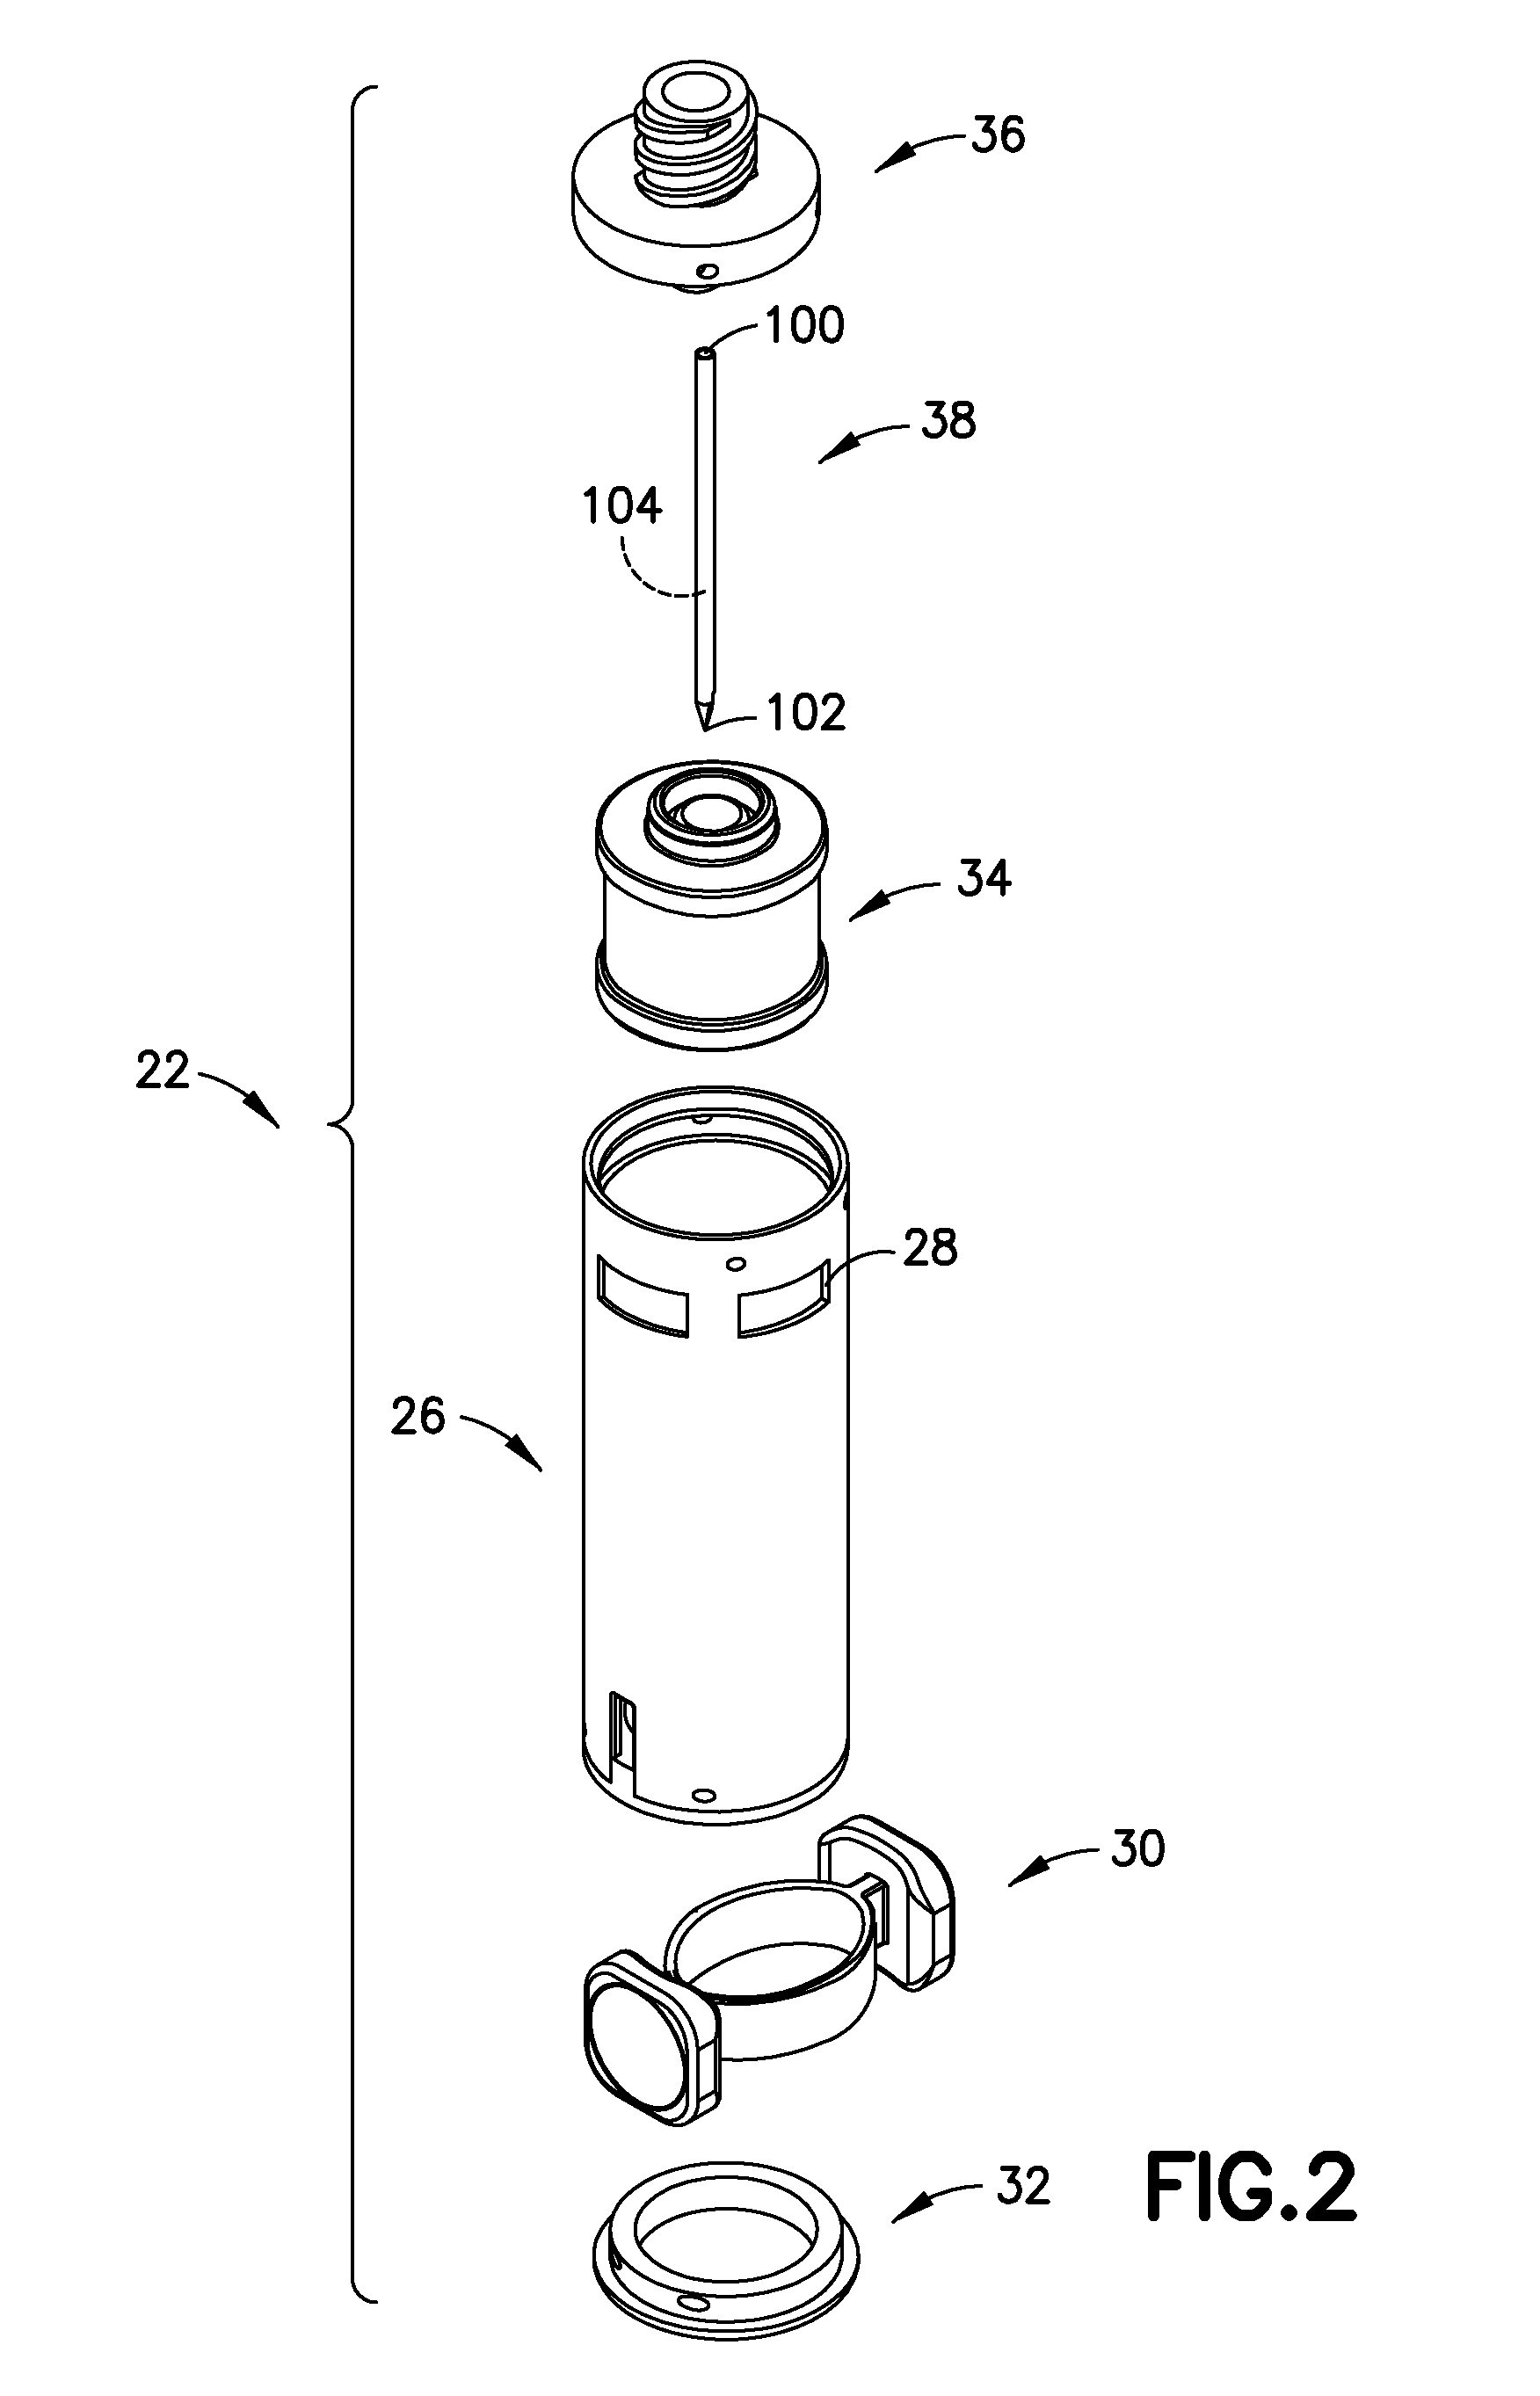 System for Closed Transfer of Fluids With a Locking Member